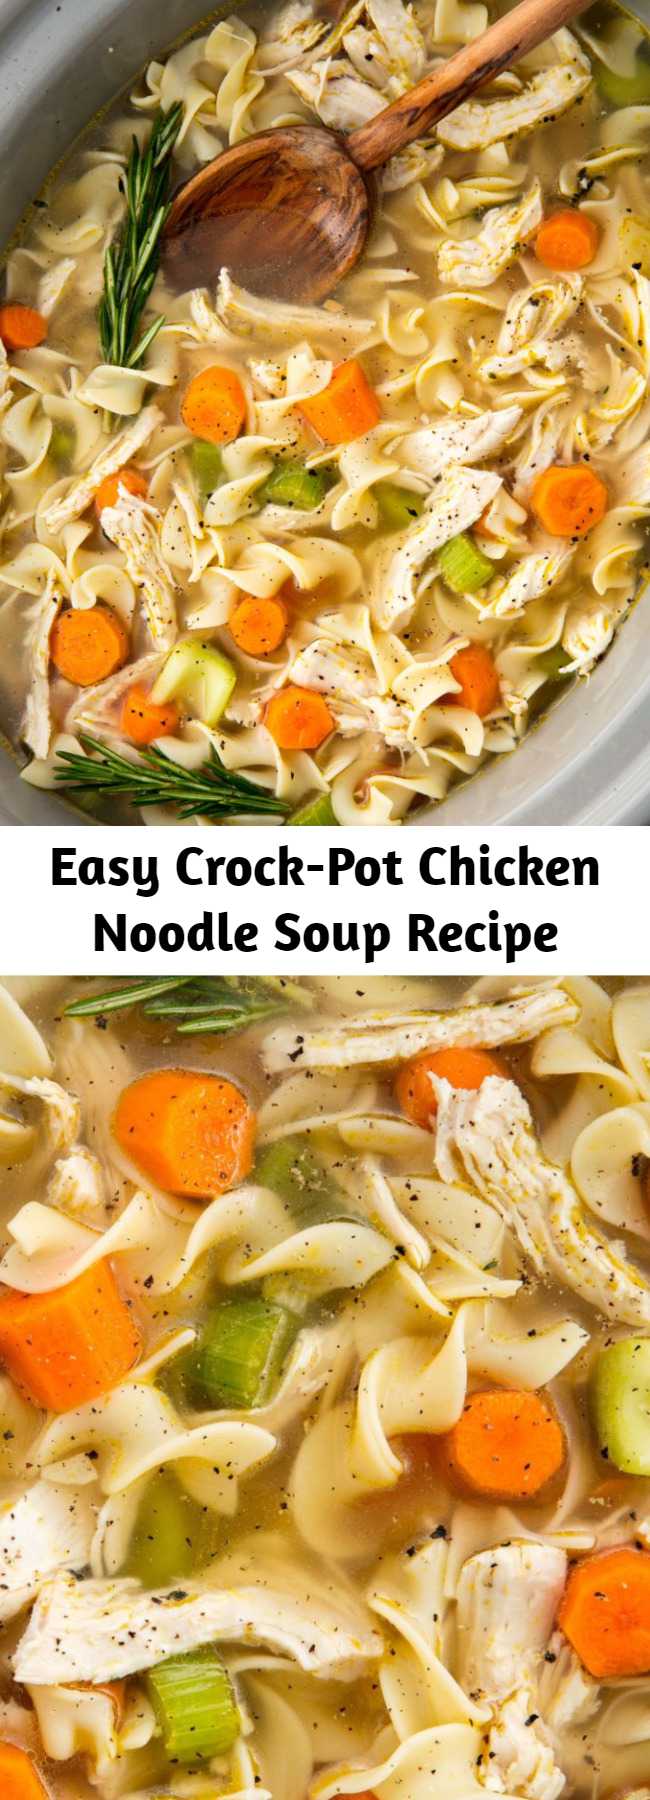 Easy Crock-Pot Chicken Noodle Soup Recipe - Homemade chicken noodle soup is already easy to whip up, but tossing all of your ingredients in a slow cooker makes it even easier. The easiest way to make the most comforting meal. #easy #recipe #chicken #noodle #soup #can #carrots #crockpot #slowcooker #dinner #healthy #fast